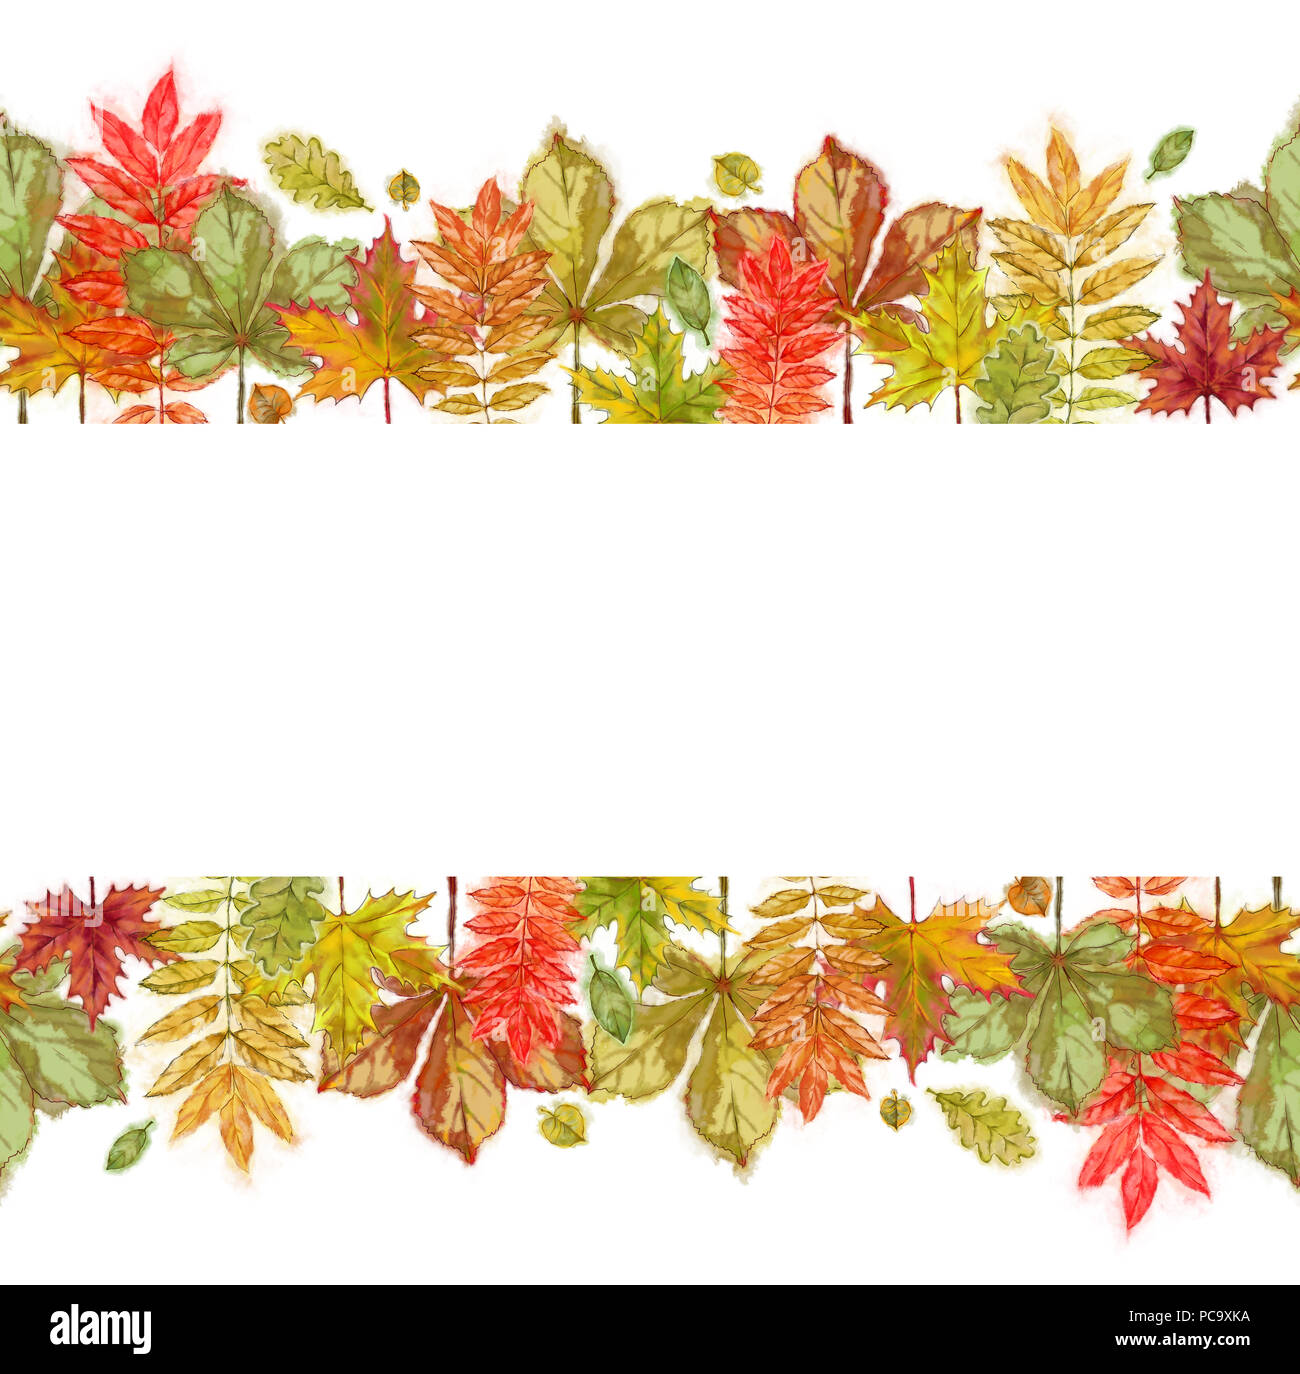 Autumn Leaves Seamless and Continuous Border. Watercolor Autumnal Design for Print, Banner, Textile Edge, Cards, Invitations, Announcement etc. Stock Photo